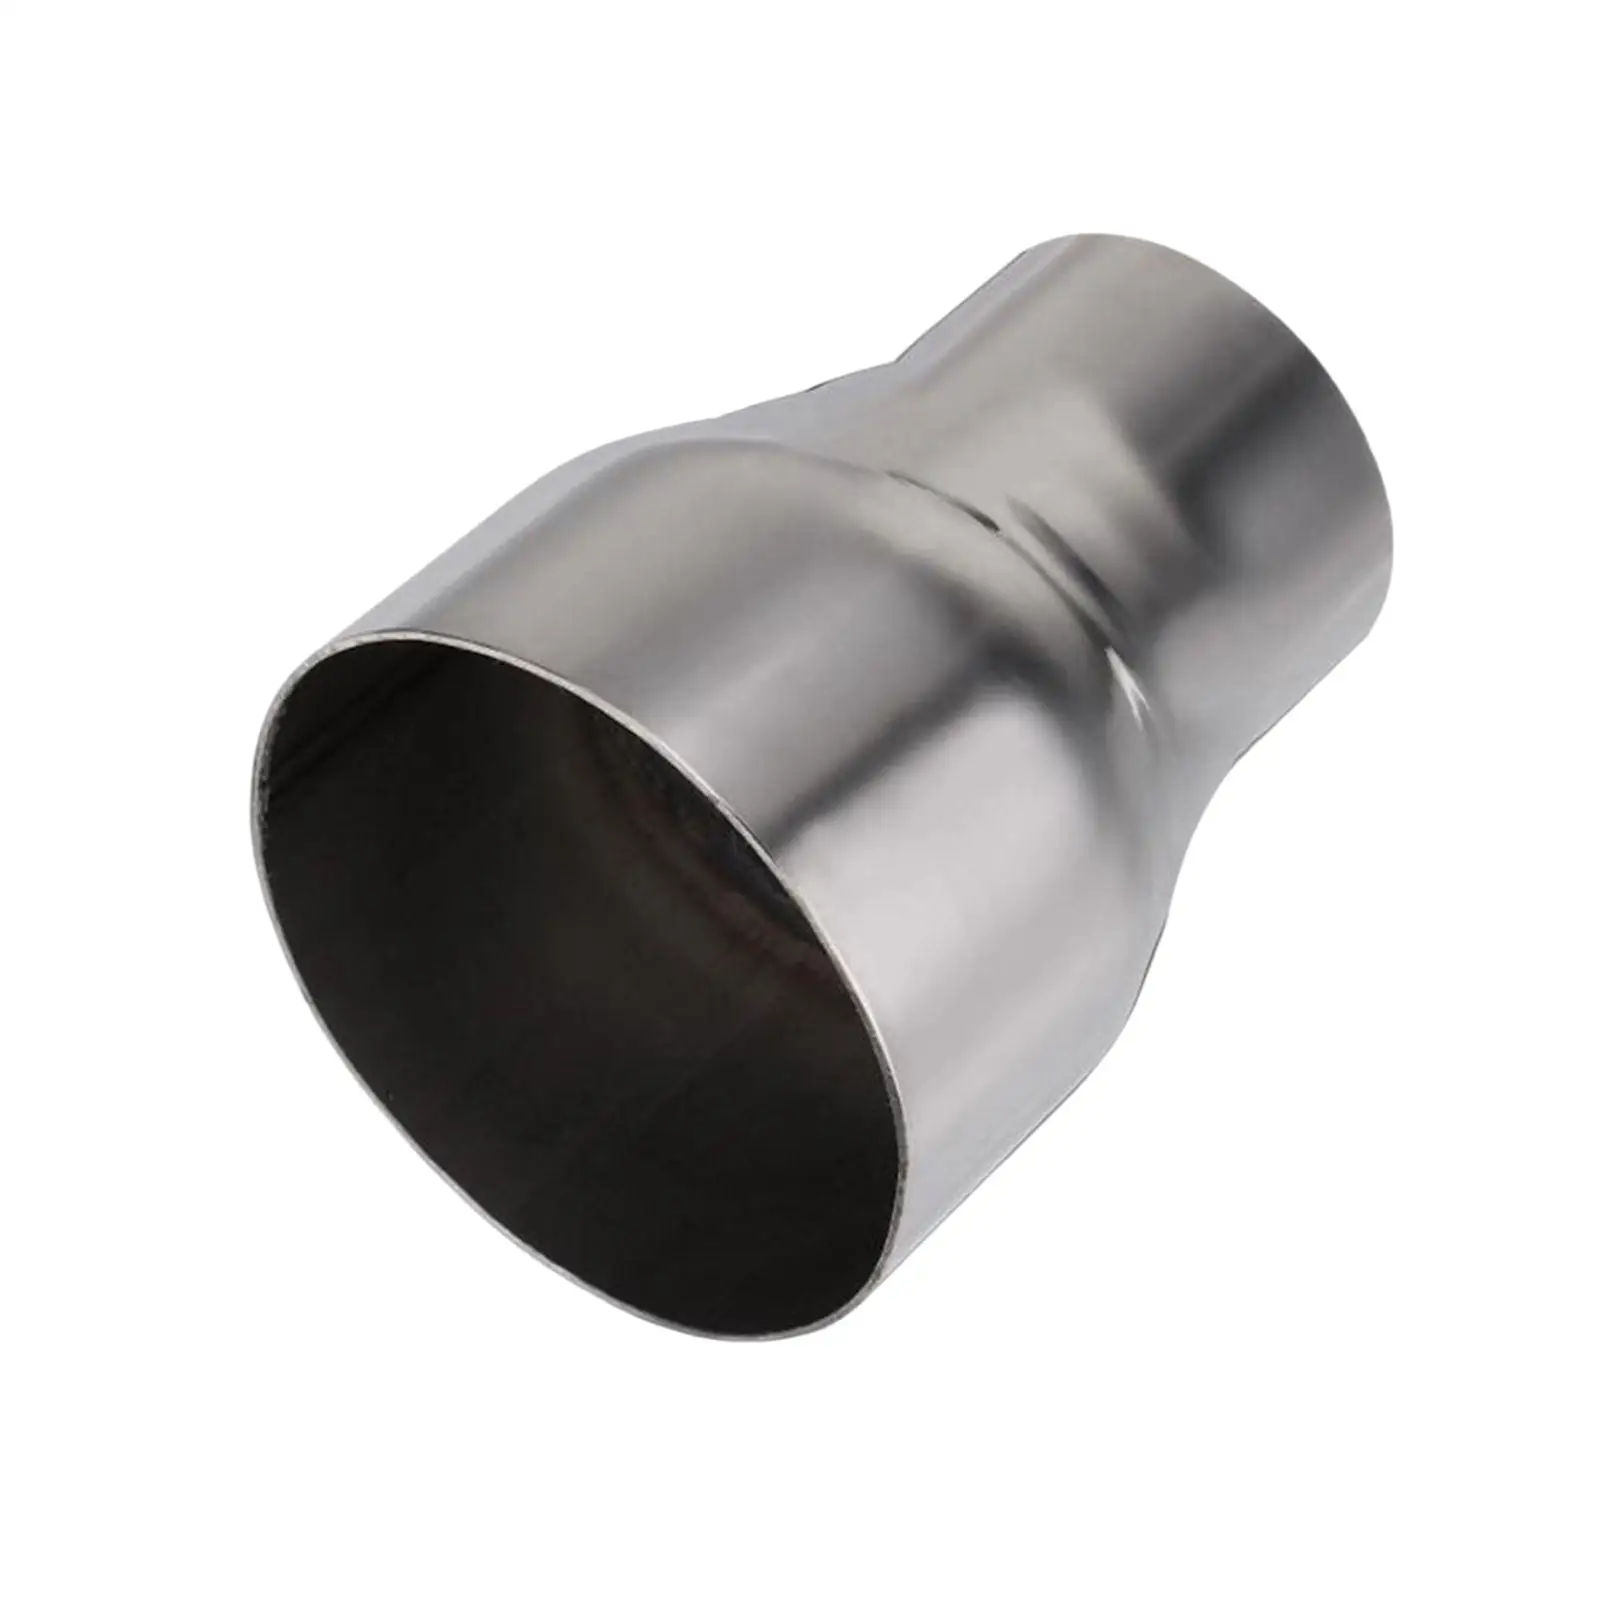 Sturdy Exhaust Pipe Connector Accessory Replaces Car Rustproof Easy Installation